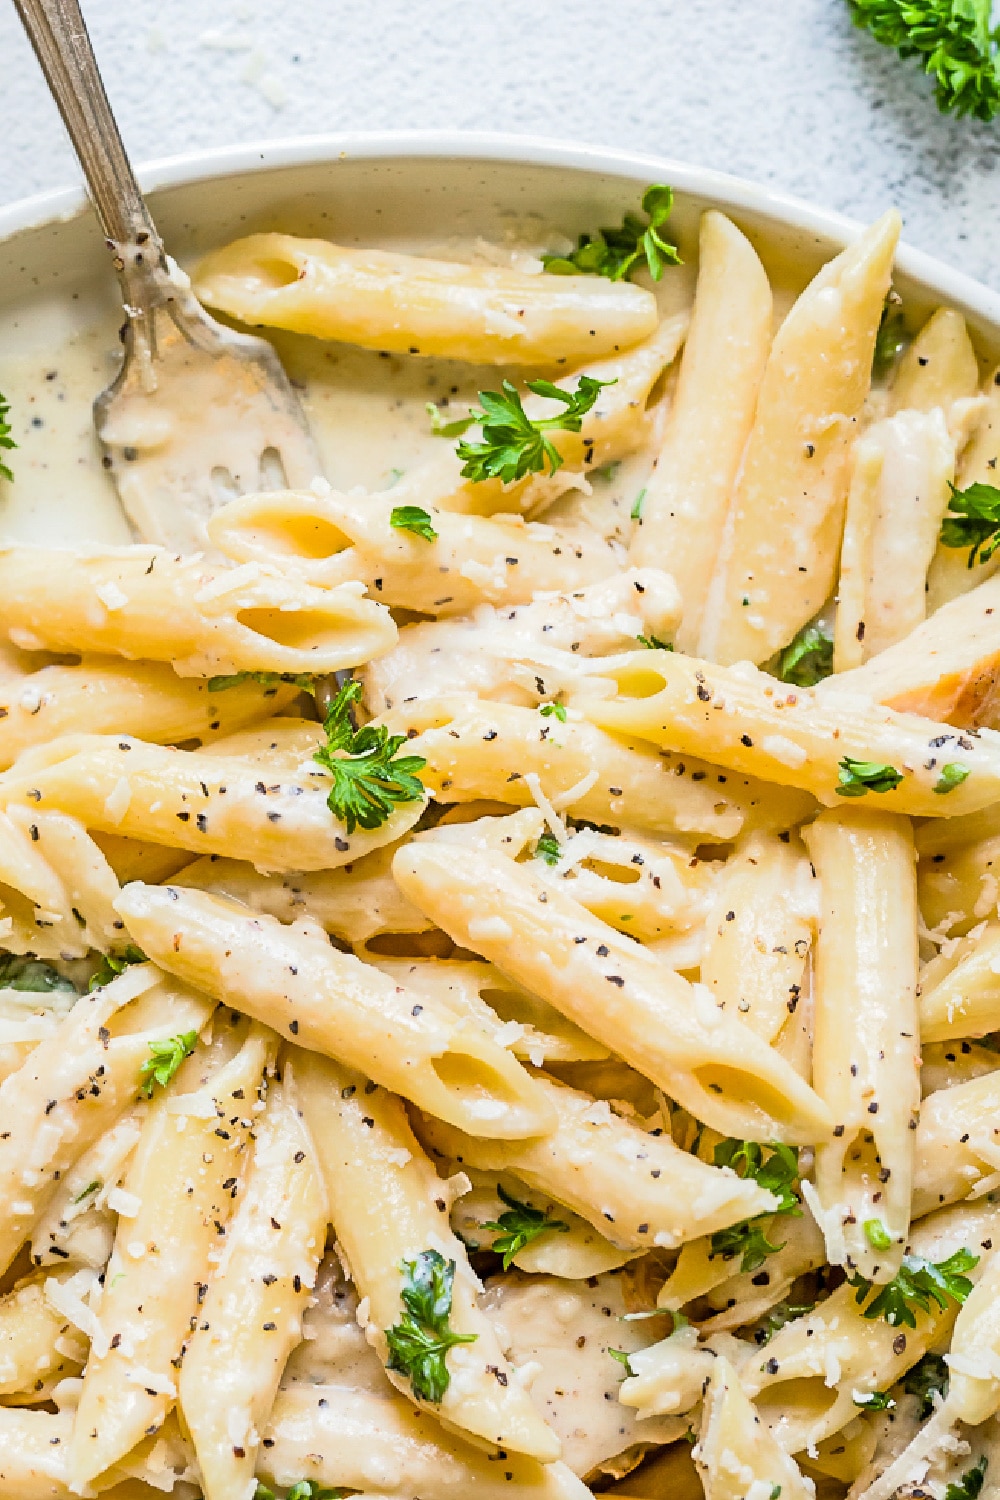 Pasta and chicken in a creamy sauce garnished with parsley. 